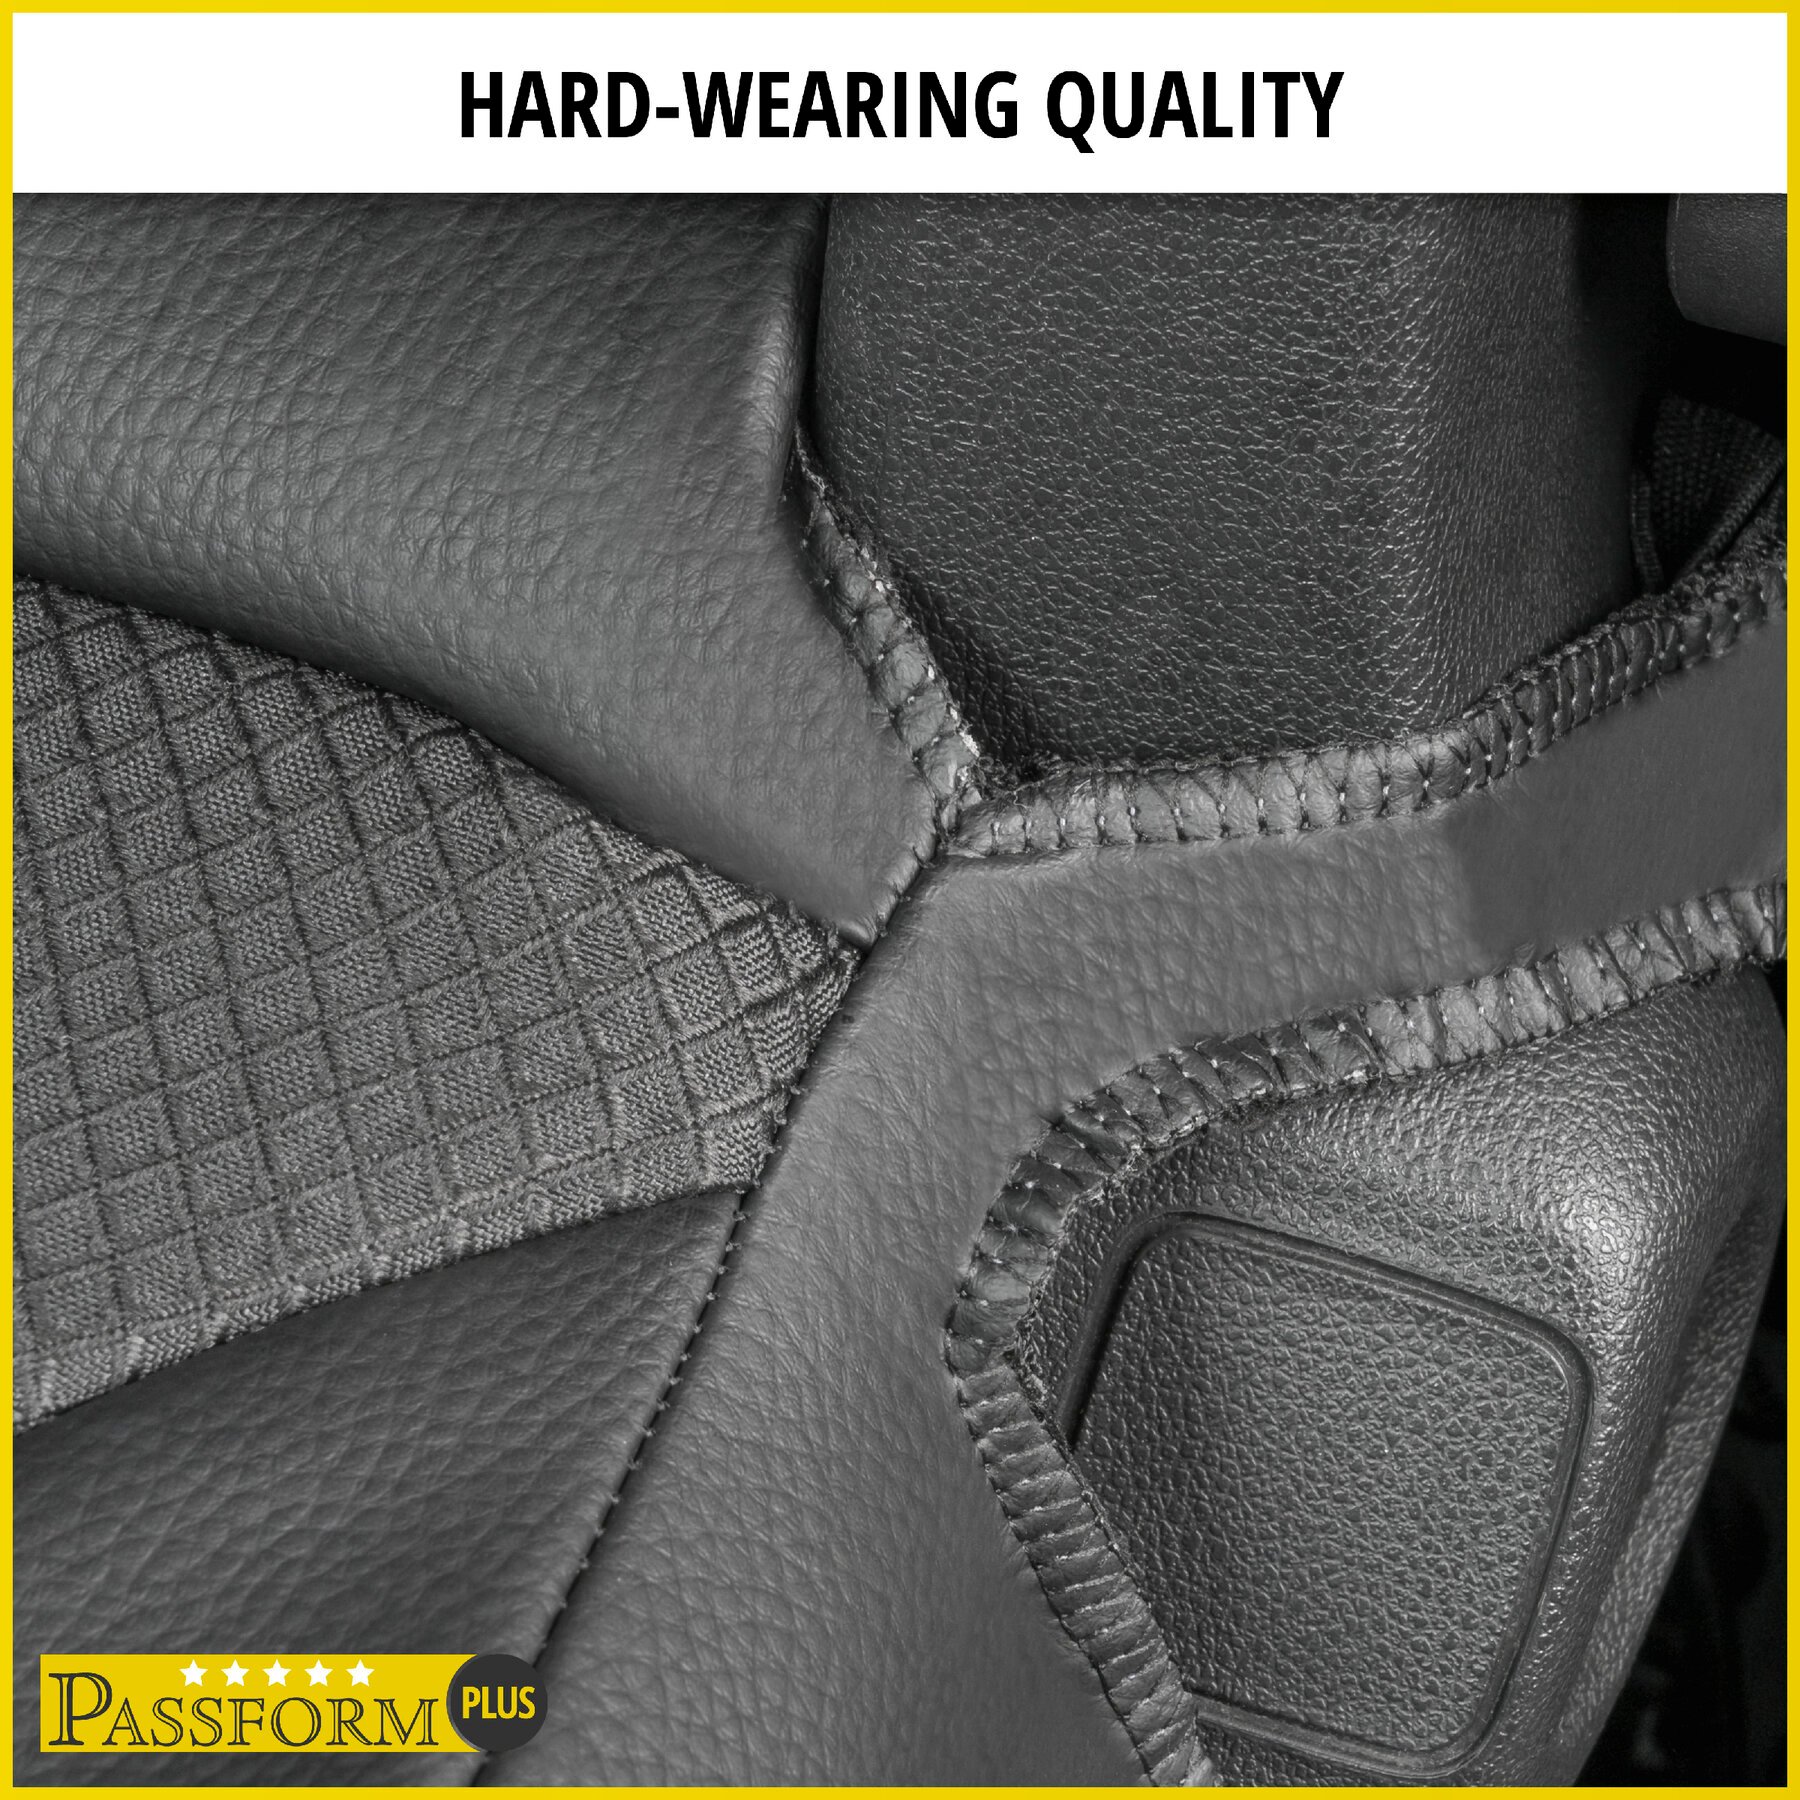 Premium Seat Cover for Renault Trafic 2014-Today, 1 single seat cover front, 1 double bench cover